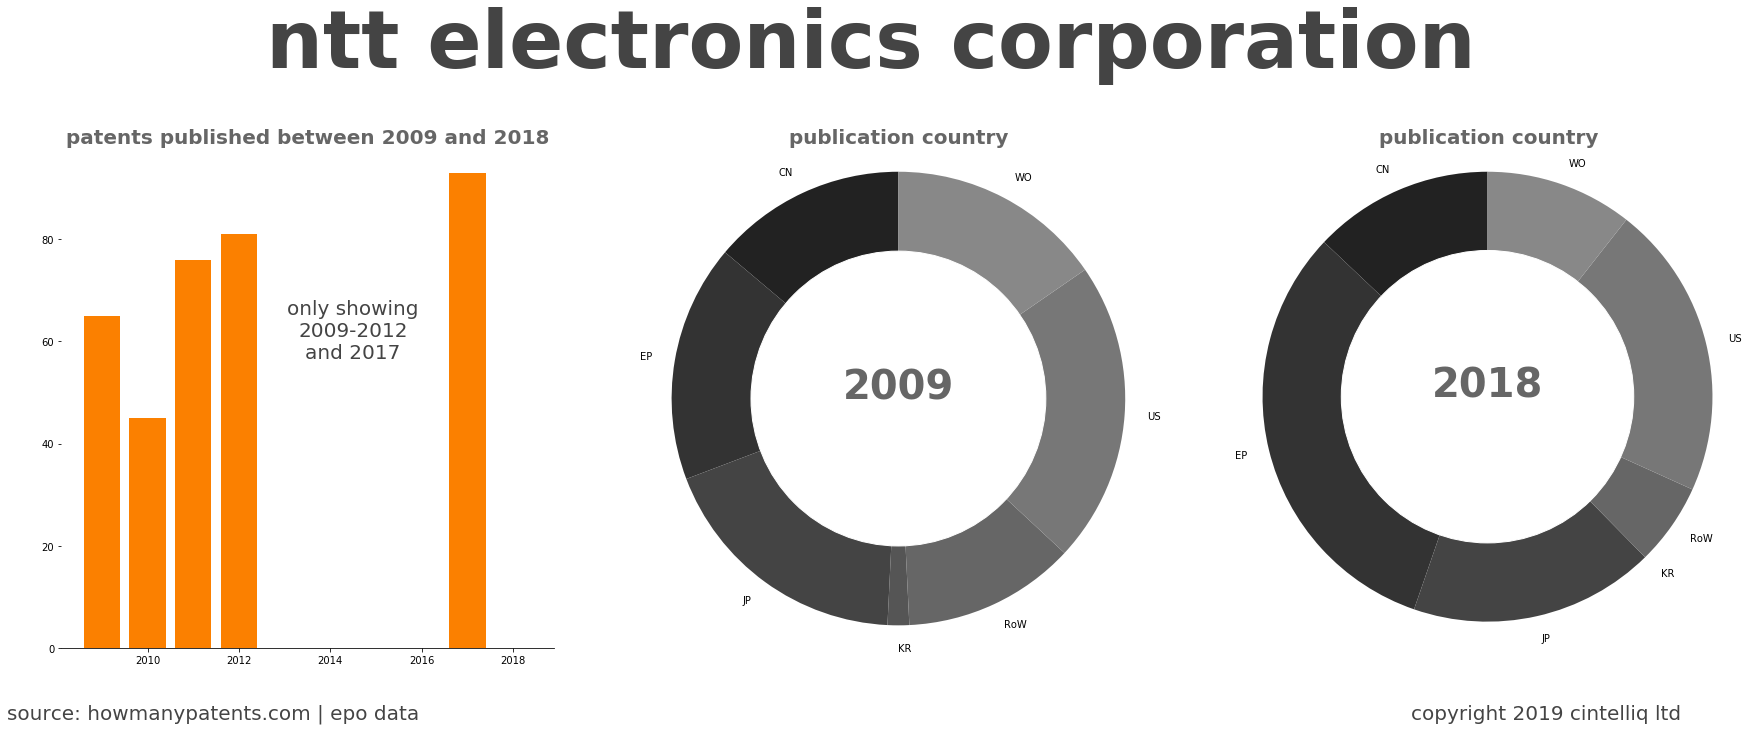 summary of patents for Ntt Electronics Corporation